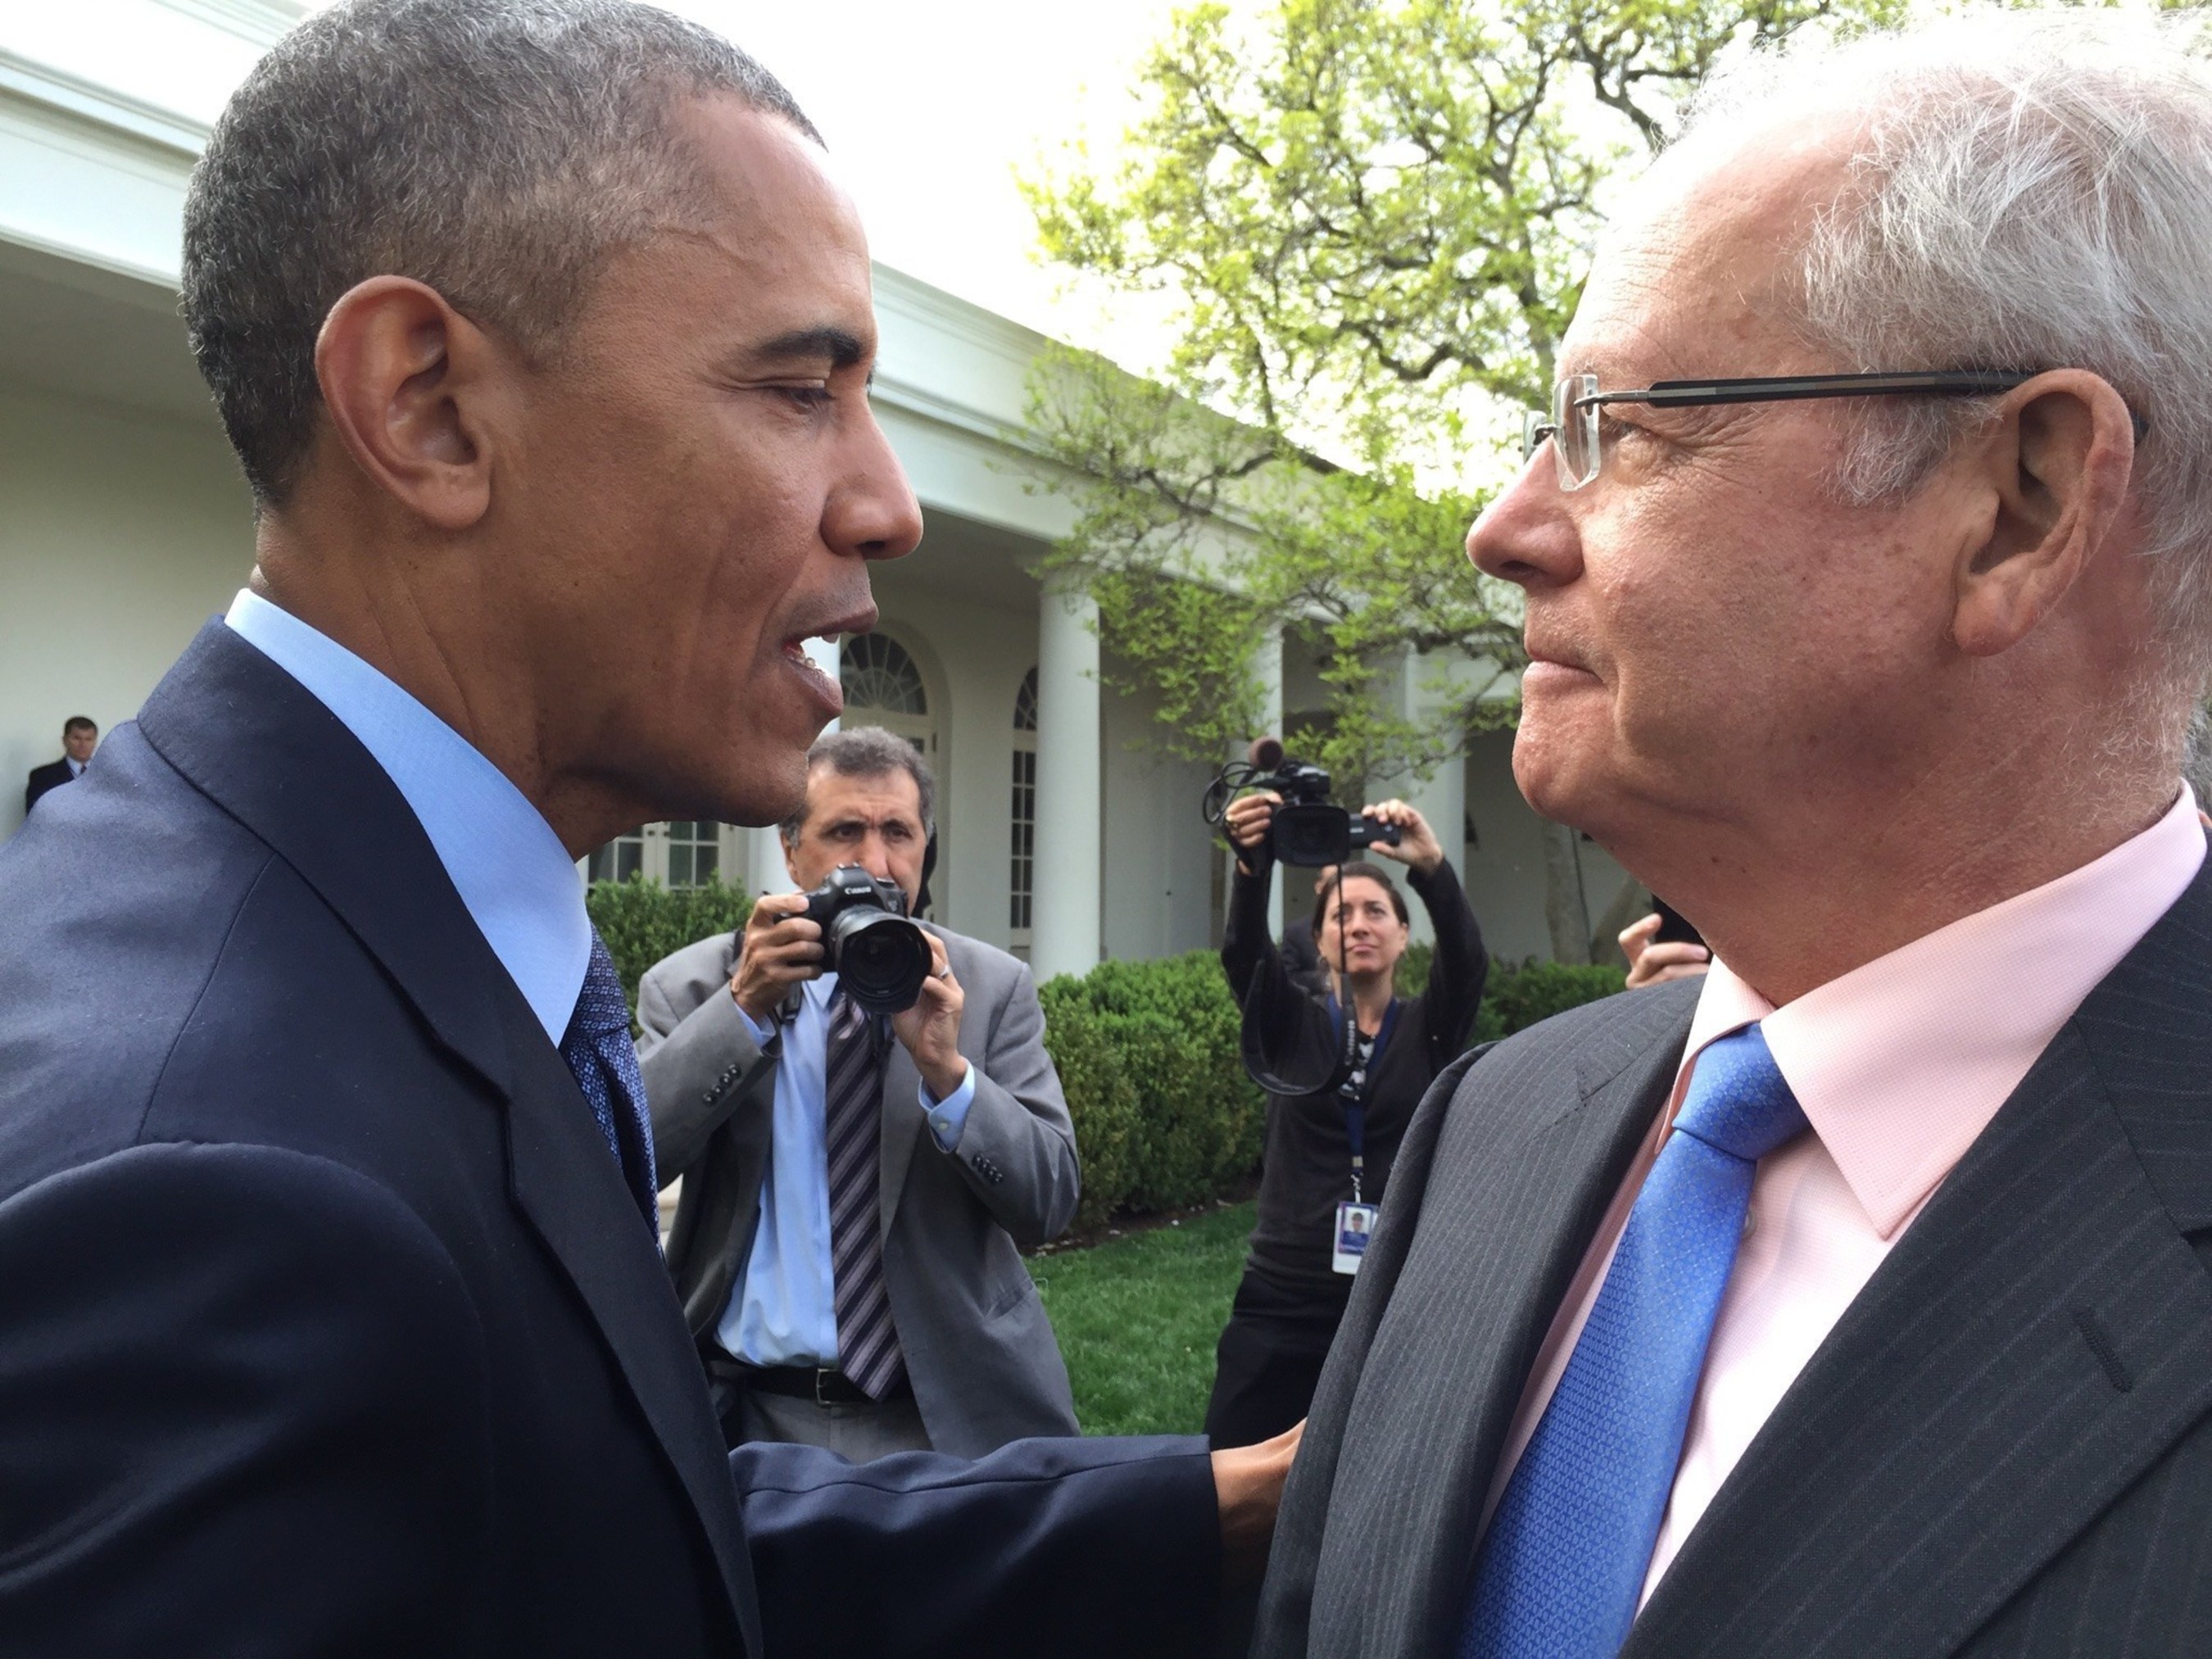 President Barack Obama and David W. Parke II, M.D. (pictured right), CEO of the American Academy of Ophthalmology, at ceremony celebrating the enactment of the overwhelmingly bipartisan law reforming Medicare physician pay yesterday." (Photo credit: Saul Levin, M.D.)